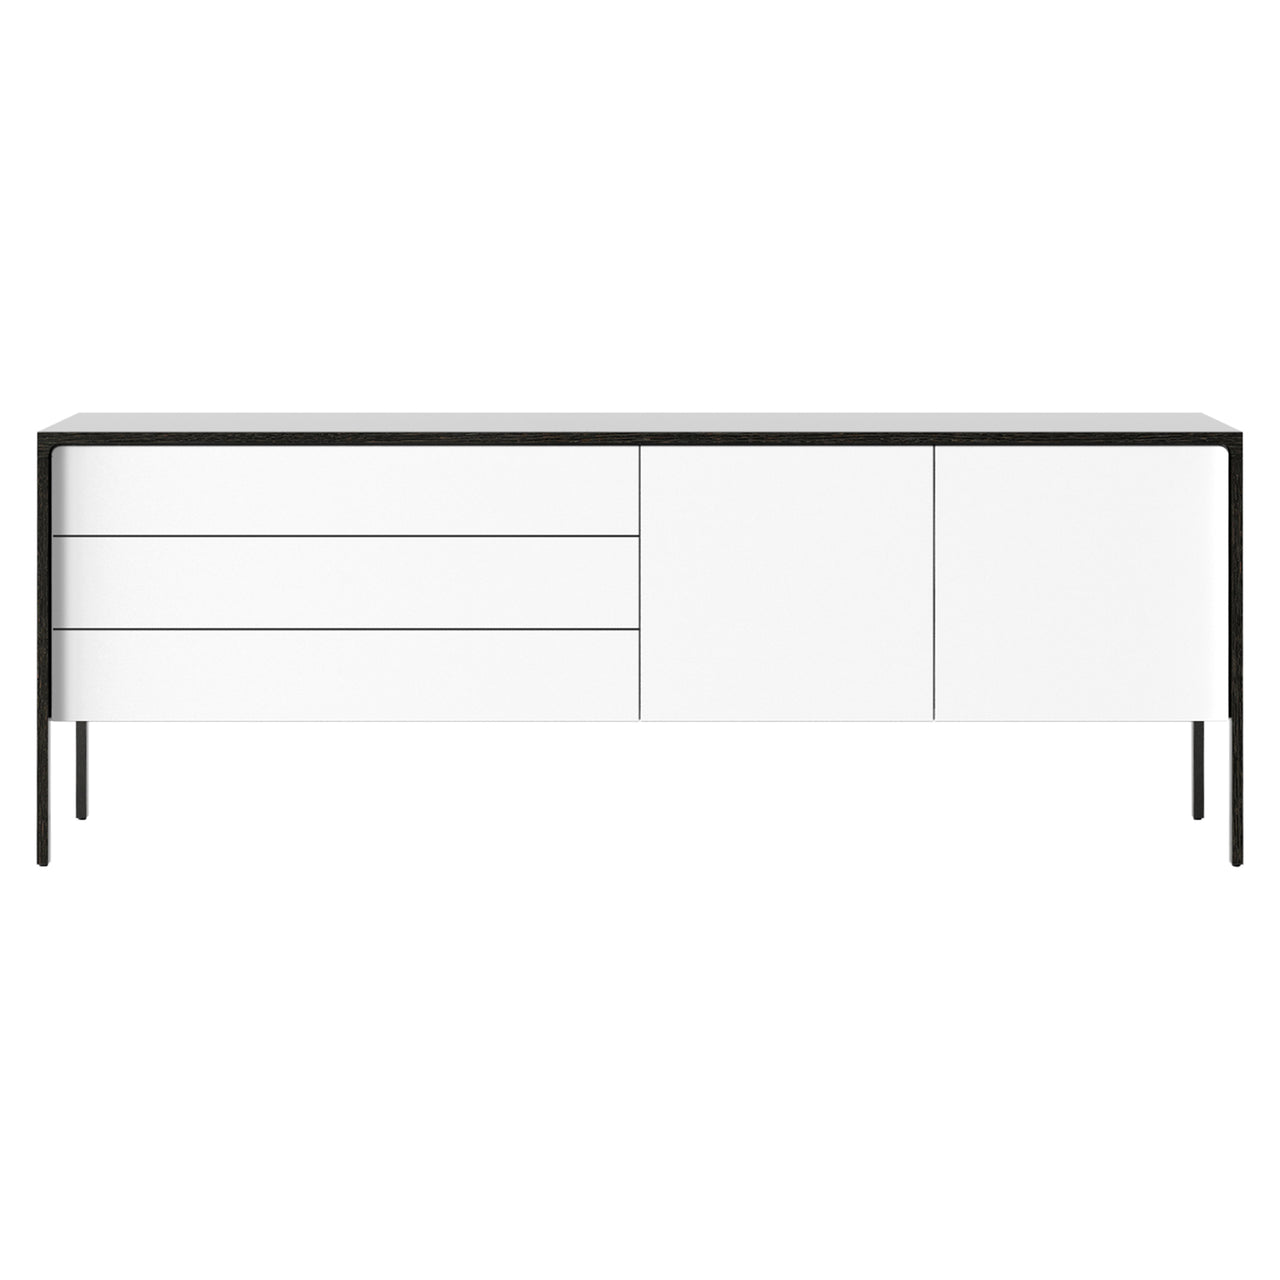 Tactile Sideboard: TAC216 + White Texturised Lacquered + Dark Grey Stained Oak